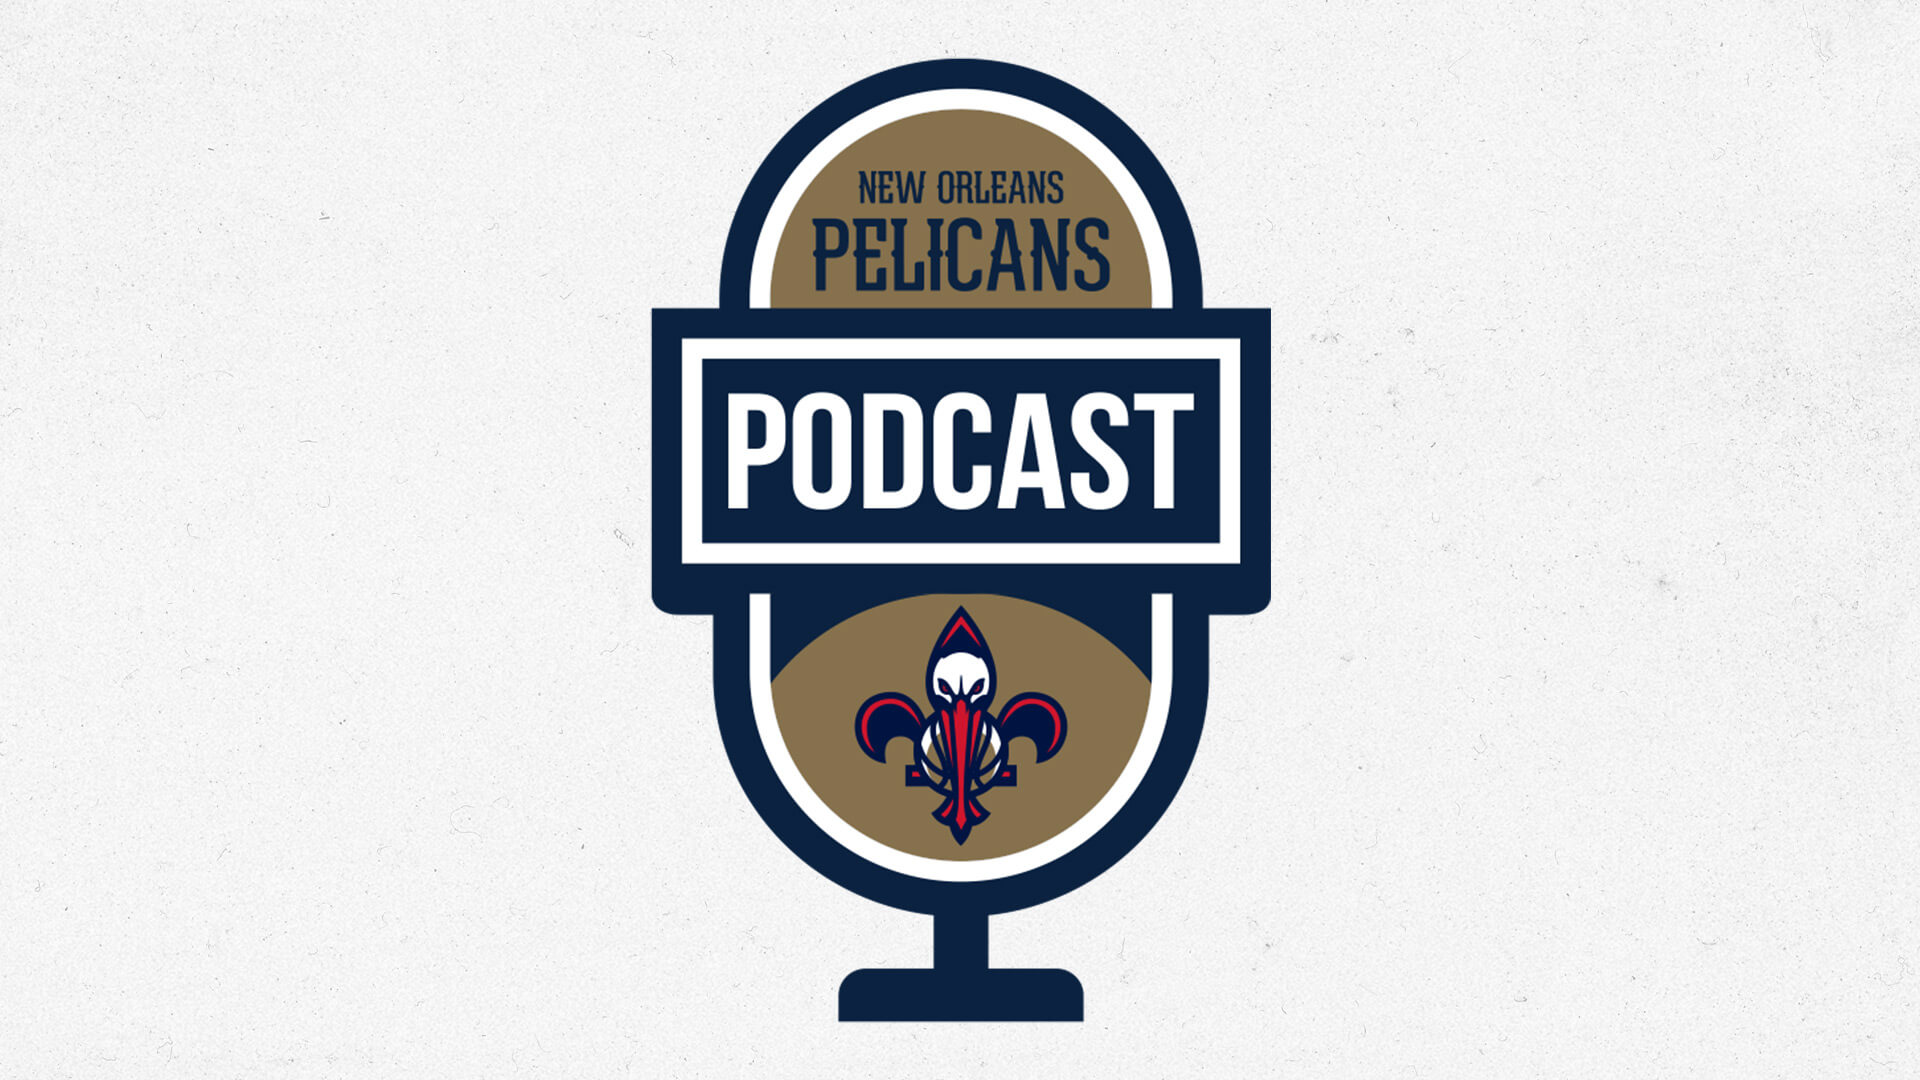 Dominique Wilkins on the New Orleans Pelicans podcast presented by SeatGeek - April 6, 2021